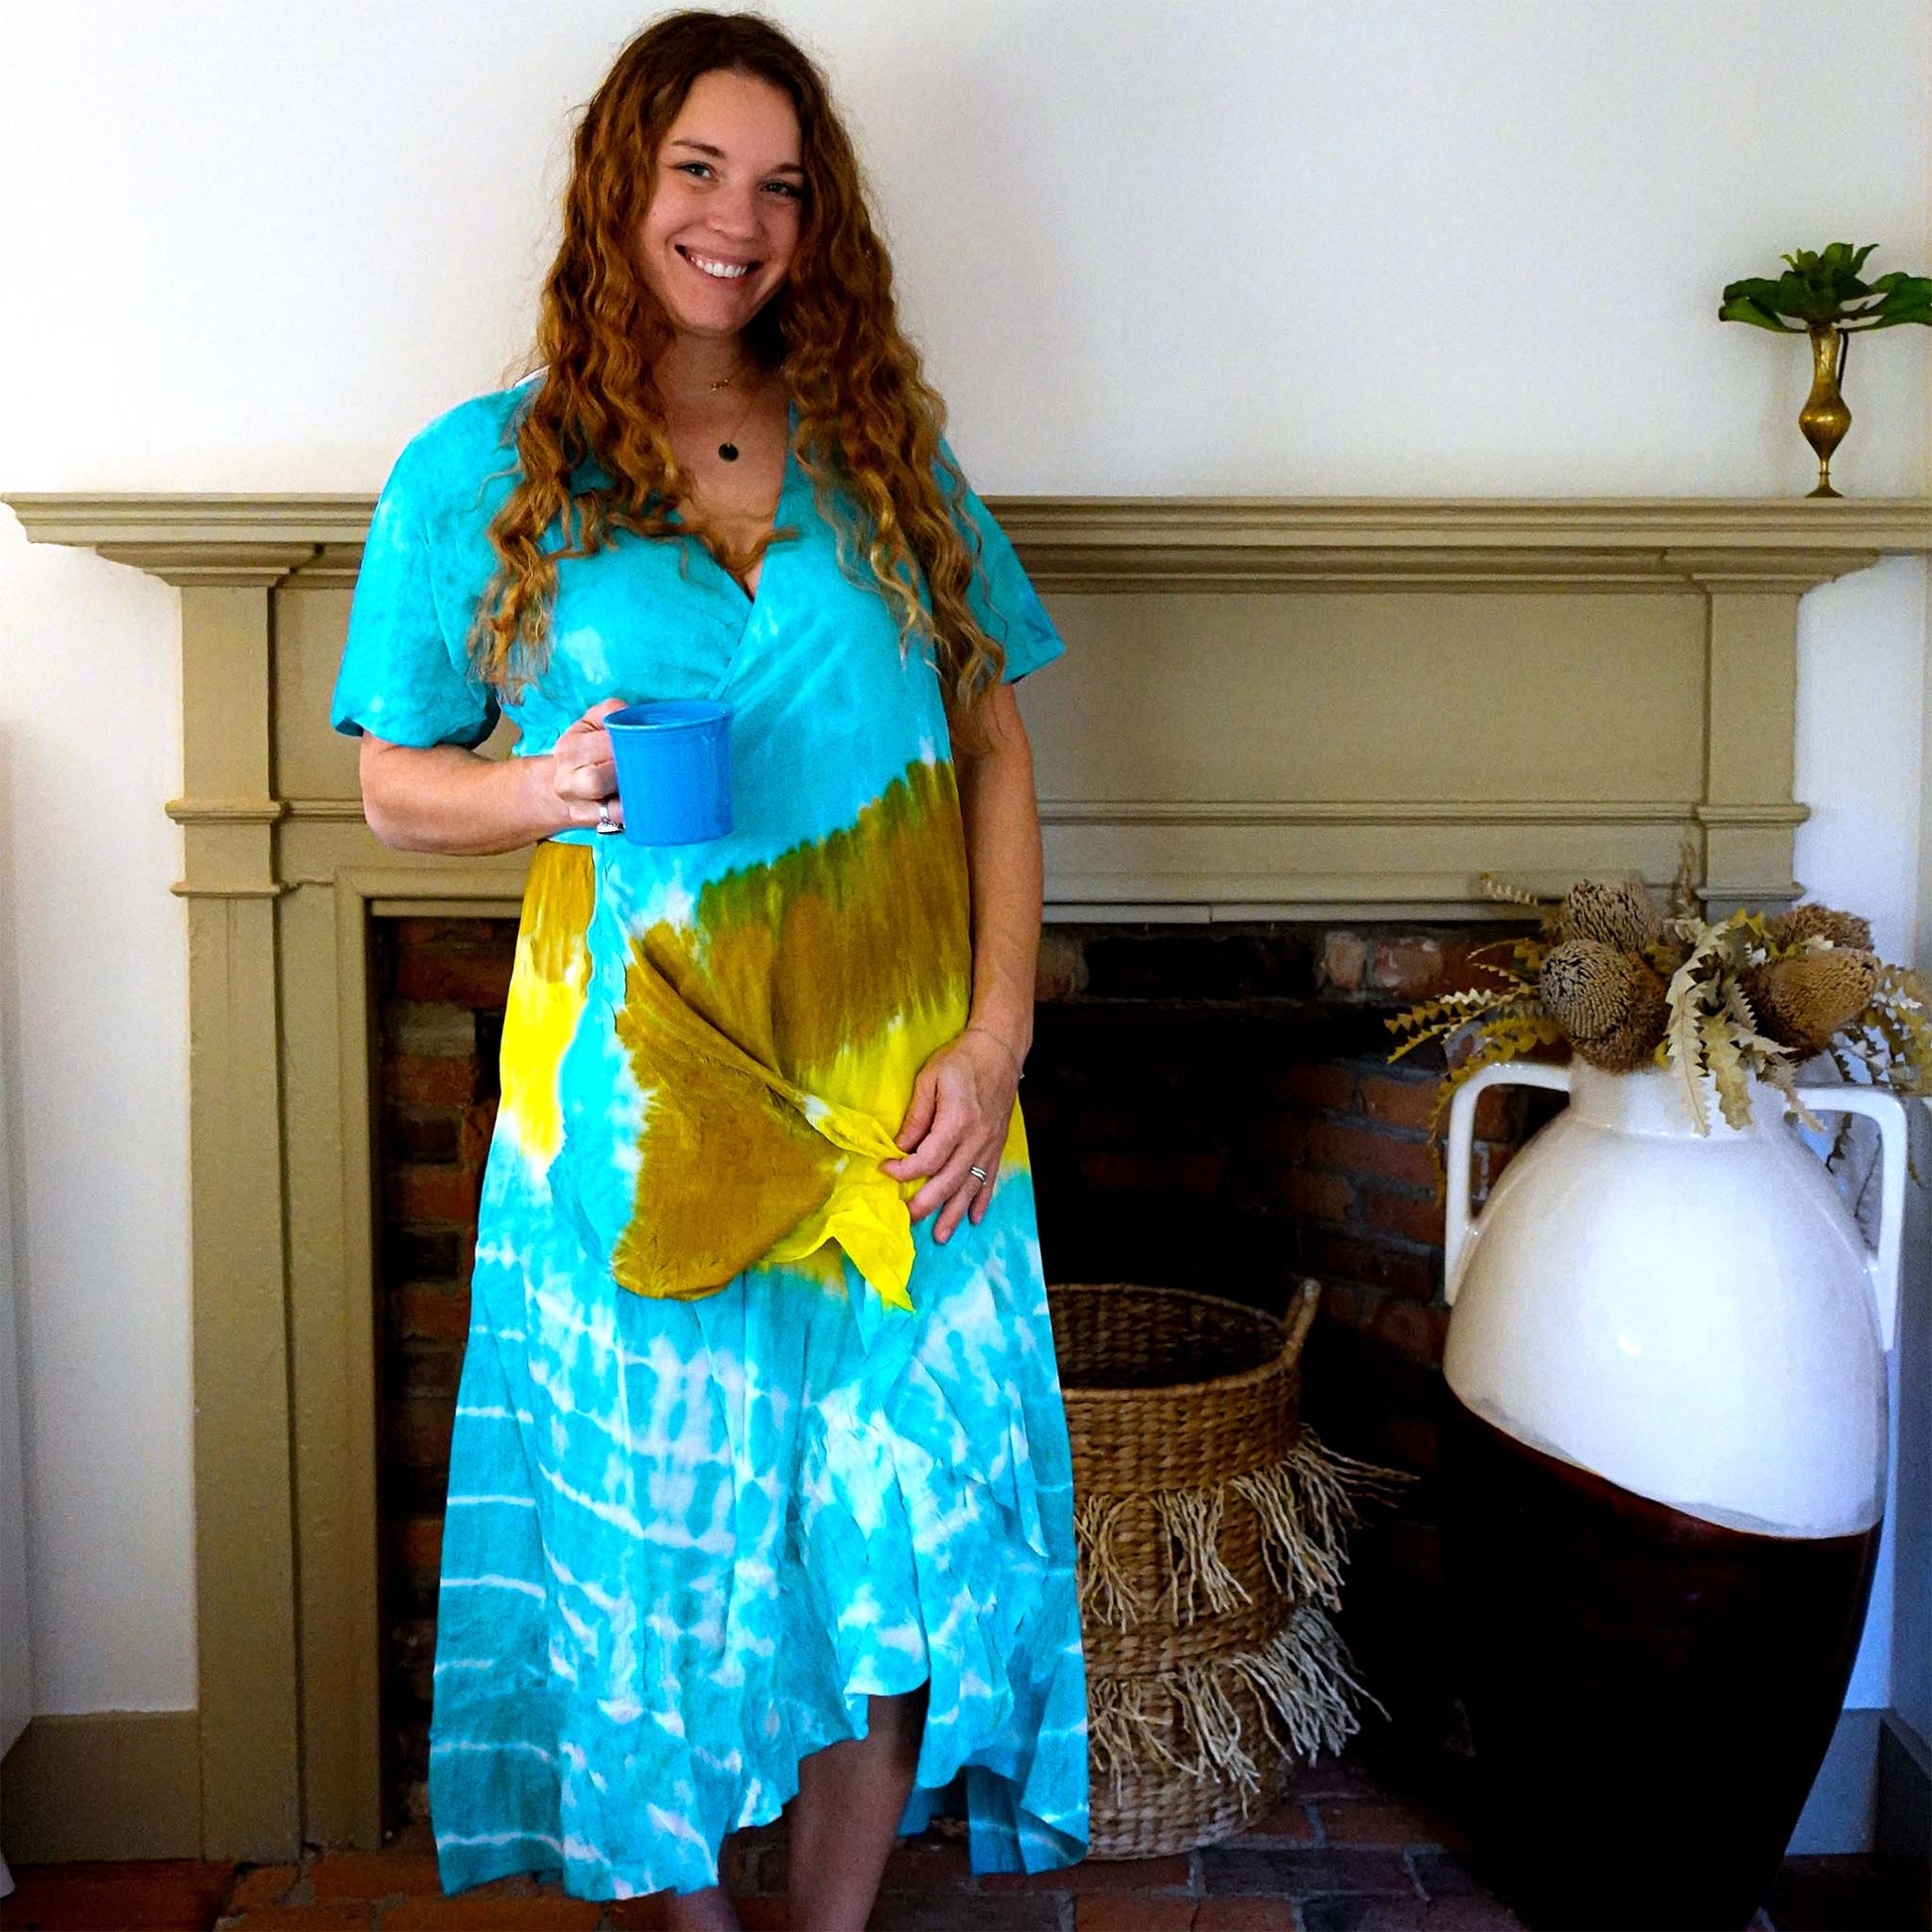 Woman standing in front of fireplace with blue coffee mug and tie dye wrap dress smiling at the camera